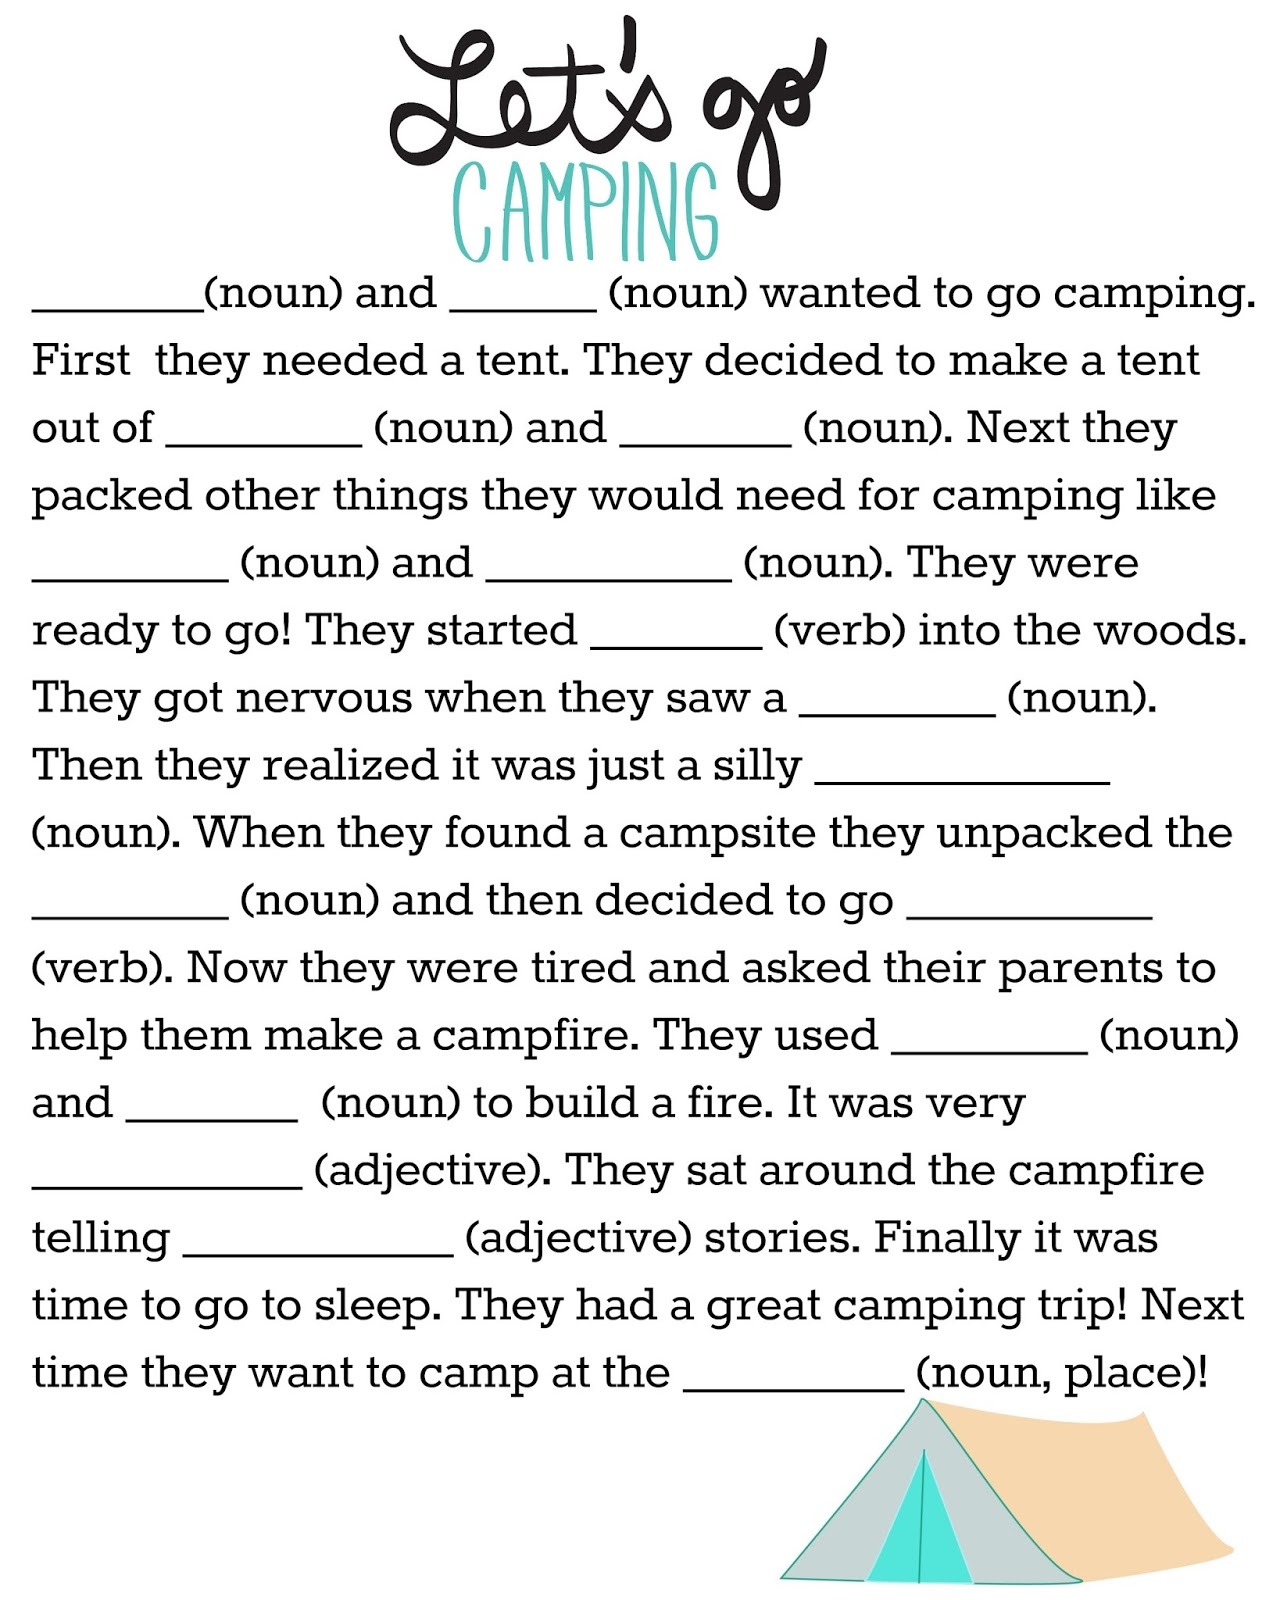 Tons Of Fun Camping Themed Activities For Kids With Free Printable The Chirping Moms